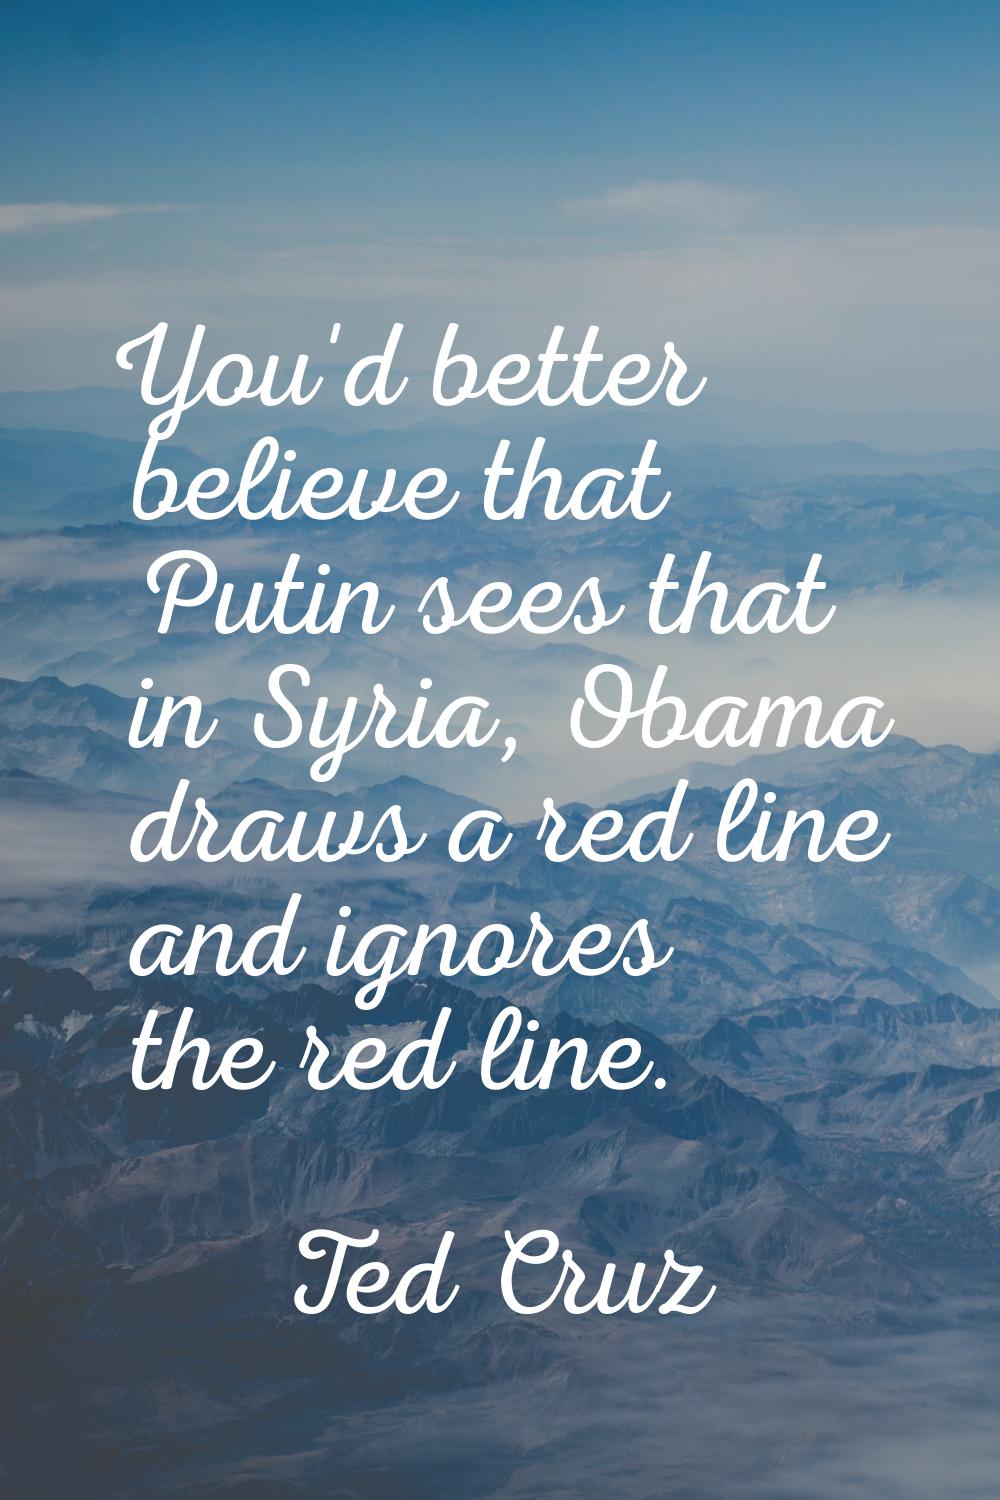 You'd better believe that Putin sees that in Syria, Obama draws a red line and ignores the red line